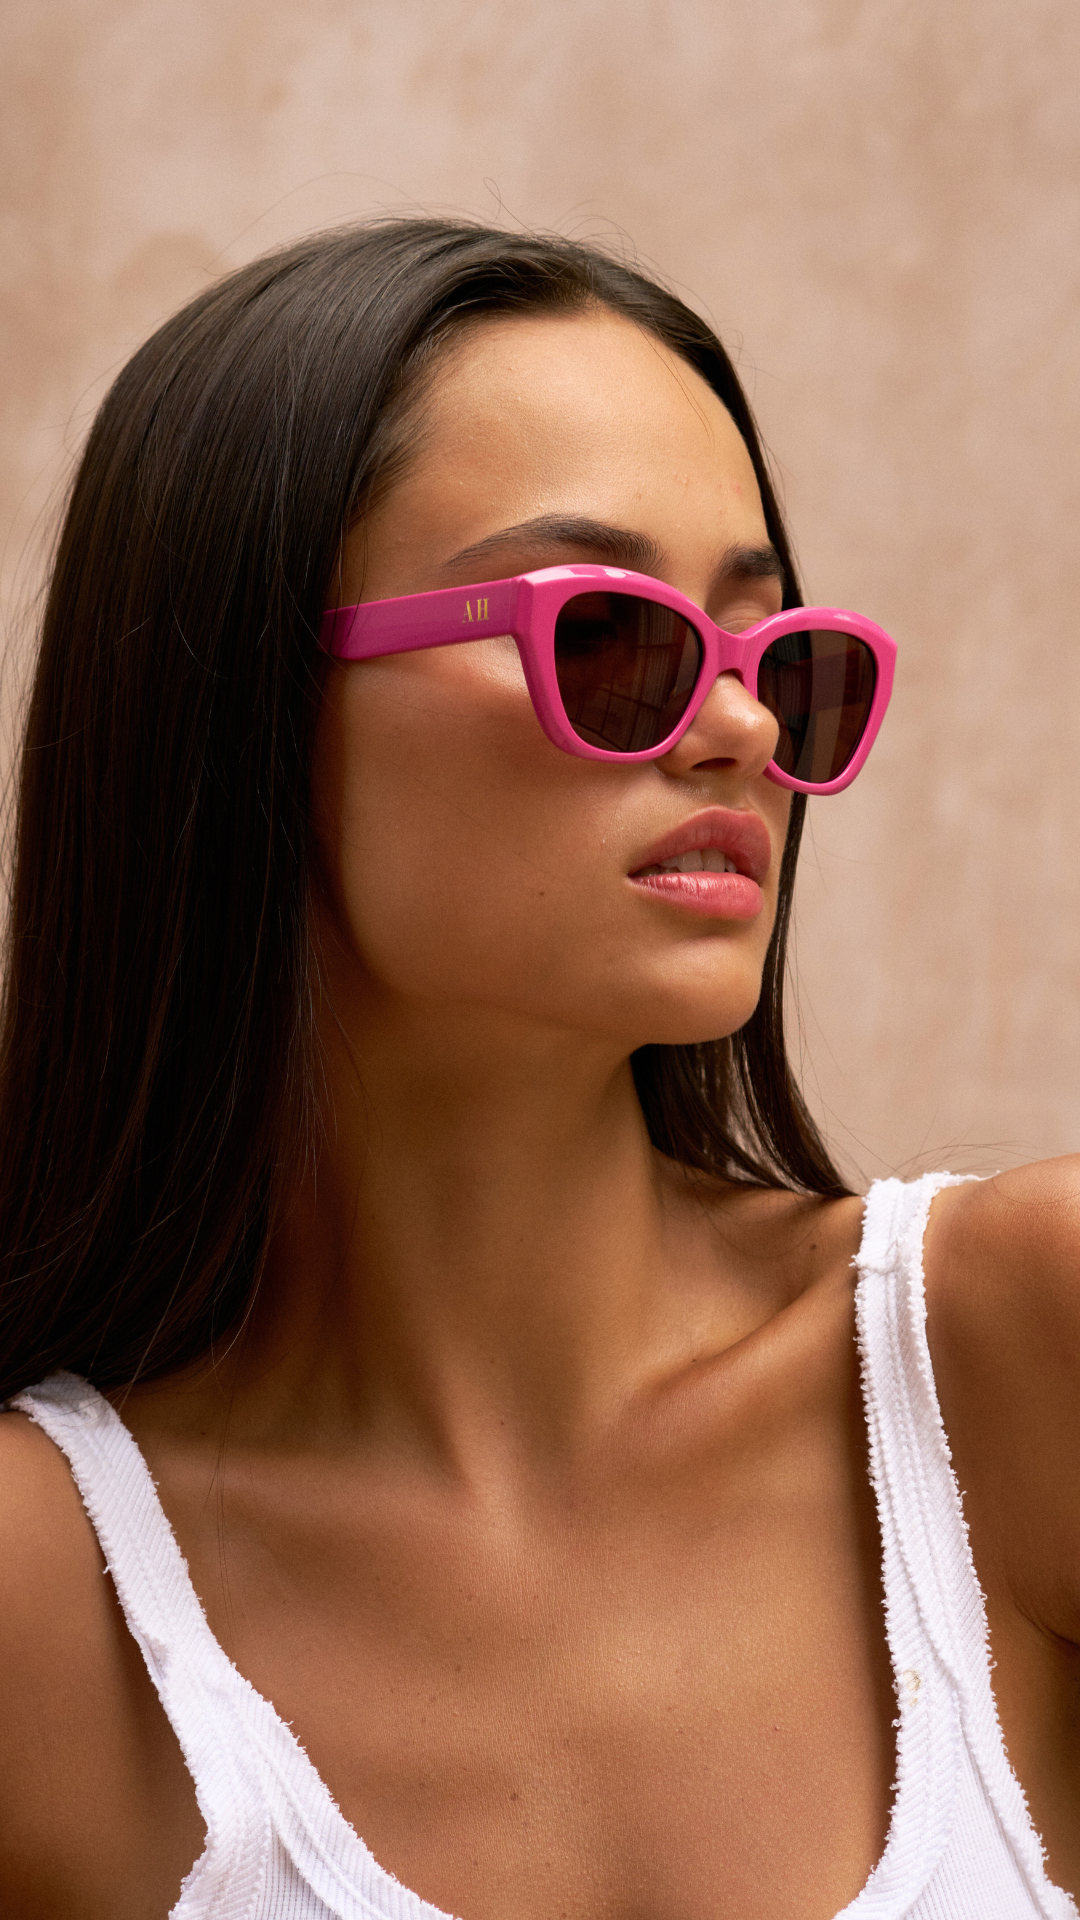 ANEA HILL pink luxuery sunglasses that are sunglasses for women. Best luxury brand sunglasses that fit smaller faces and are adjustable. Gold AH logo on the side of the sunglasses